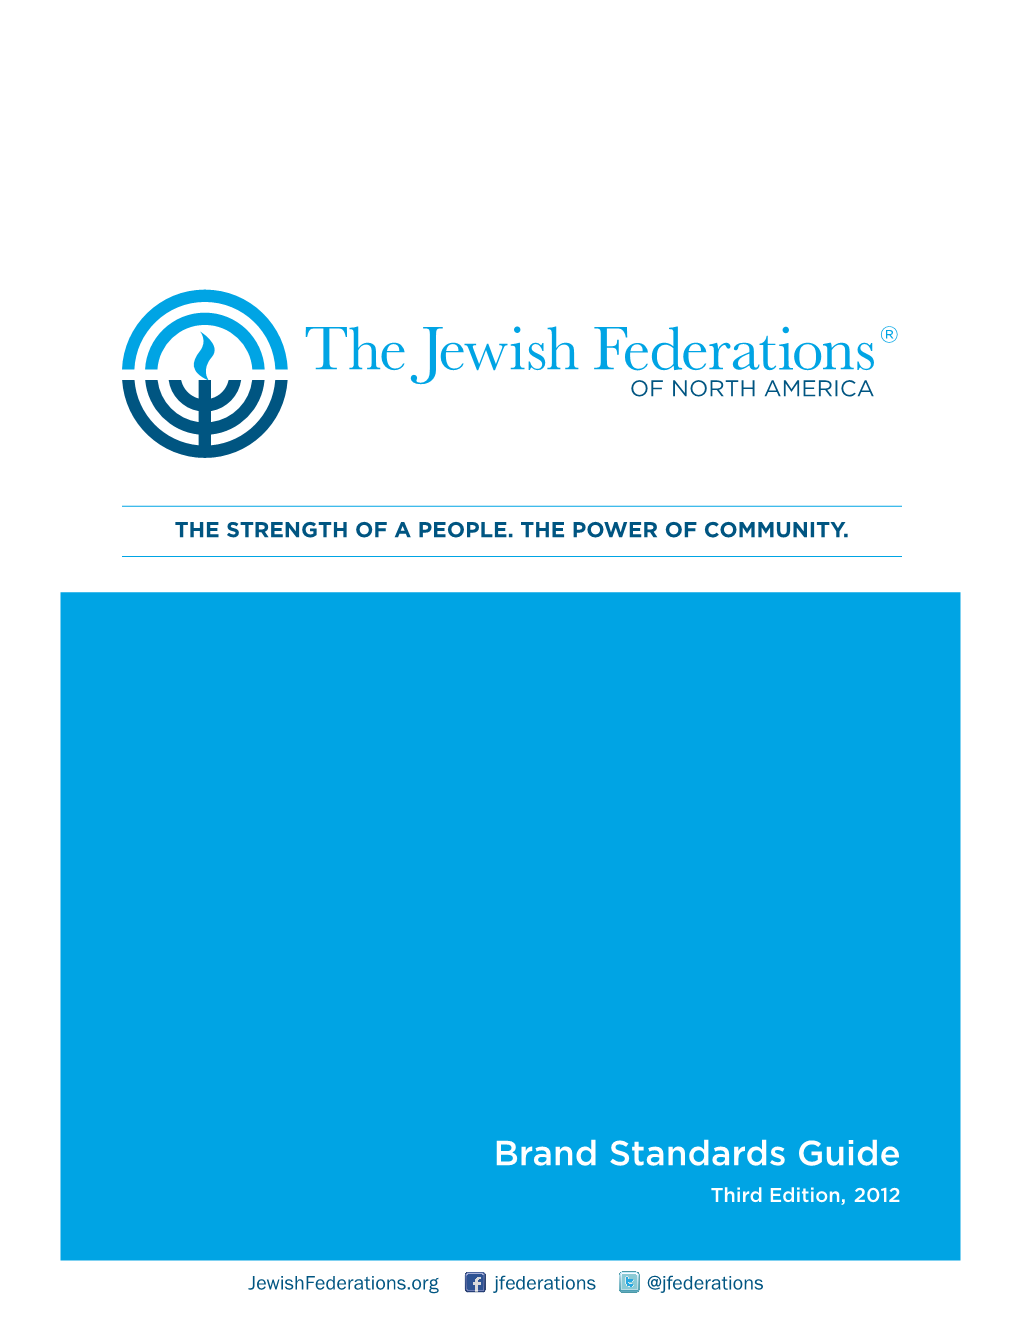 Brand Standards Guide Third Edition, 2012